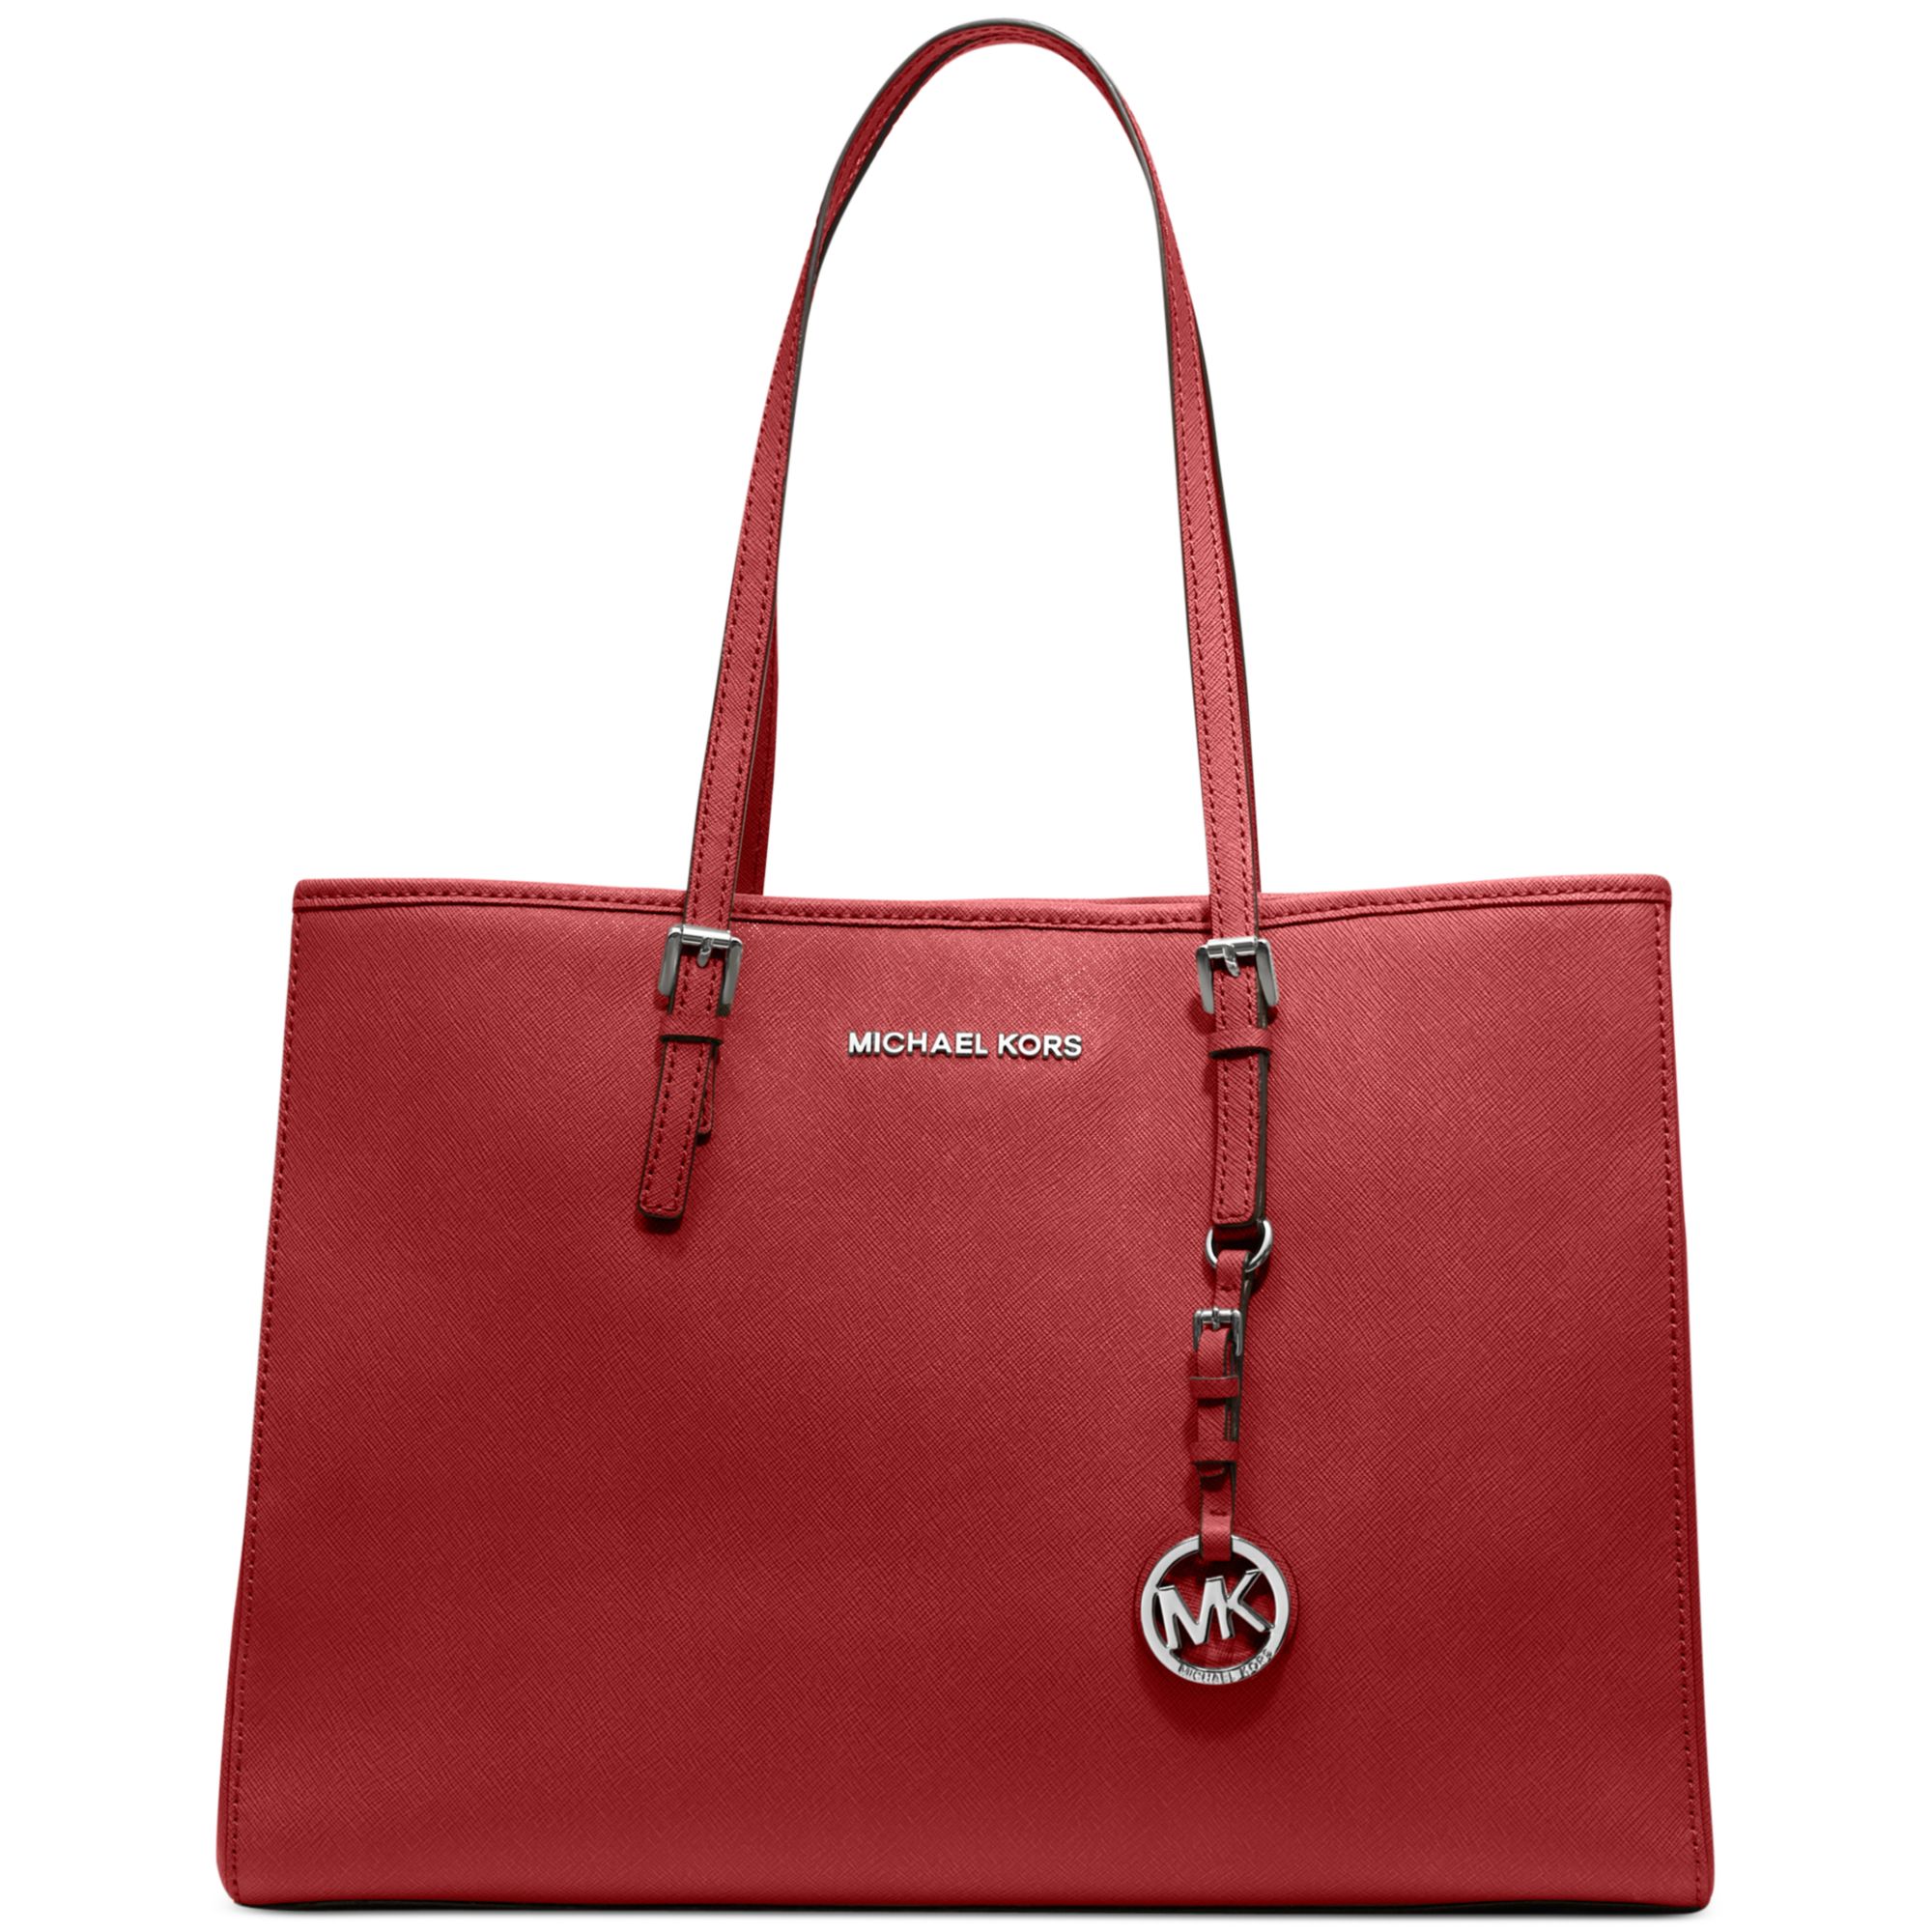 Michael Kors Jet Set Travel East West Tote in Red